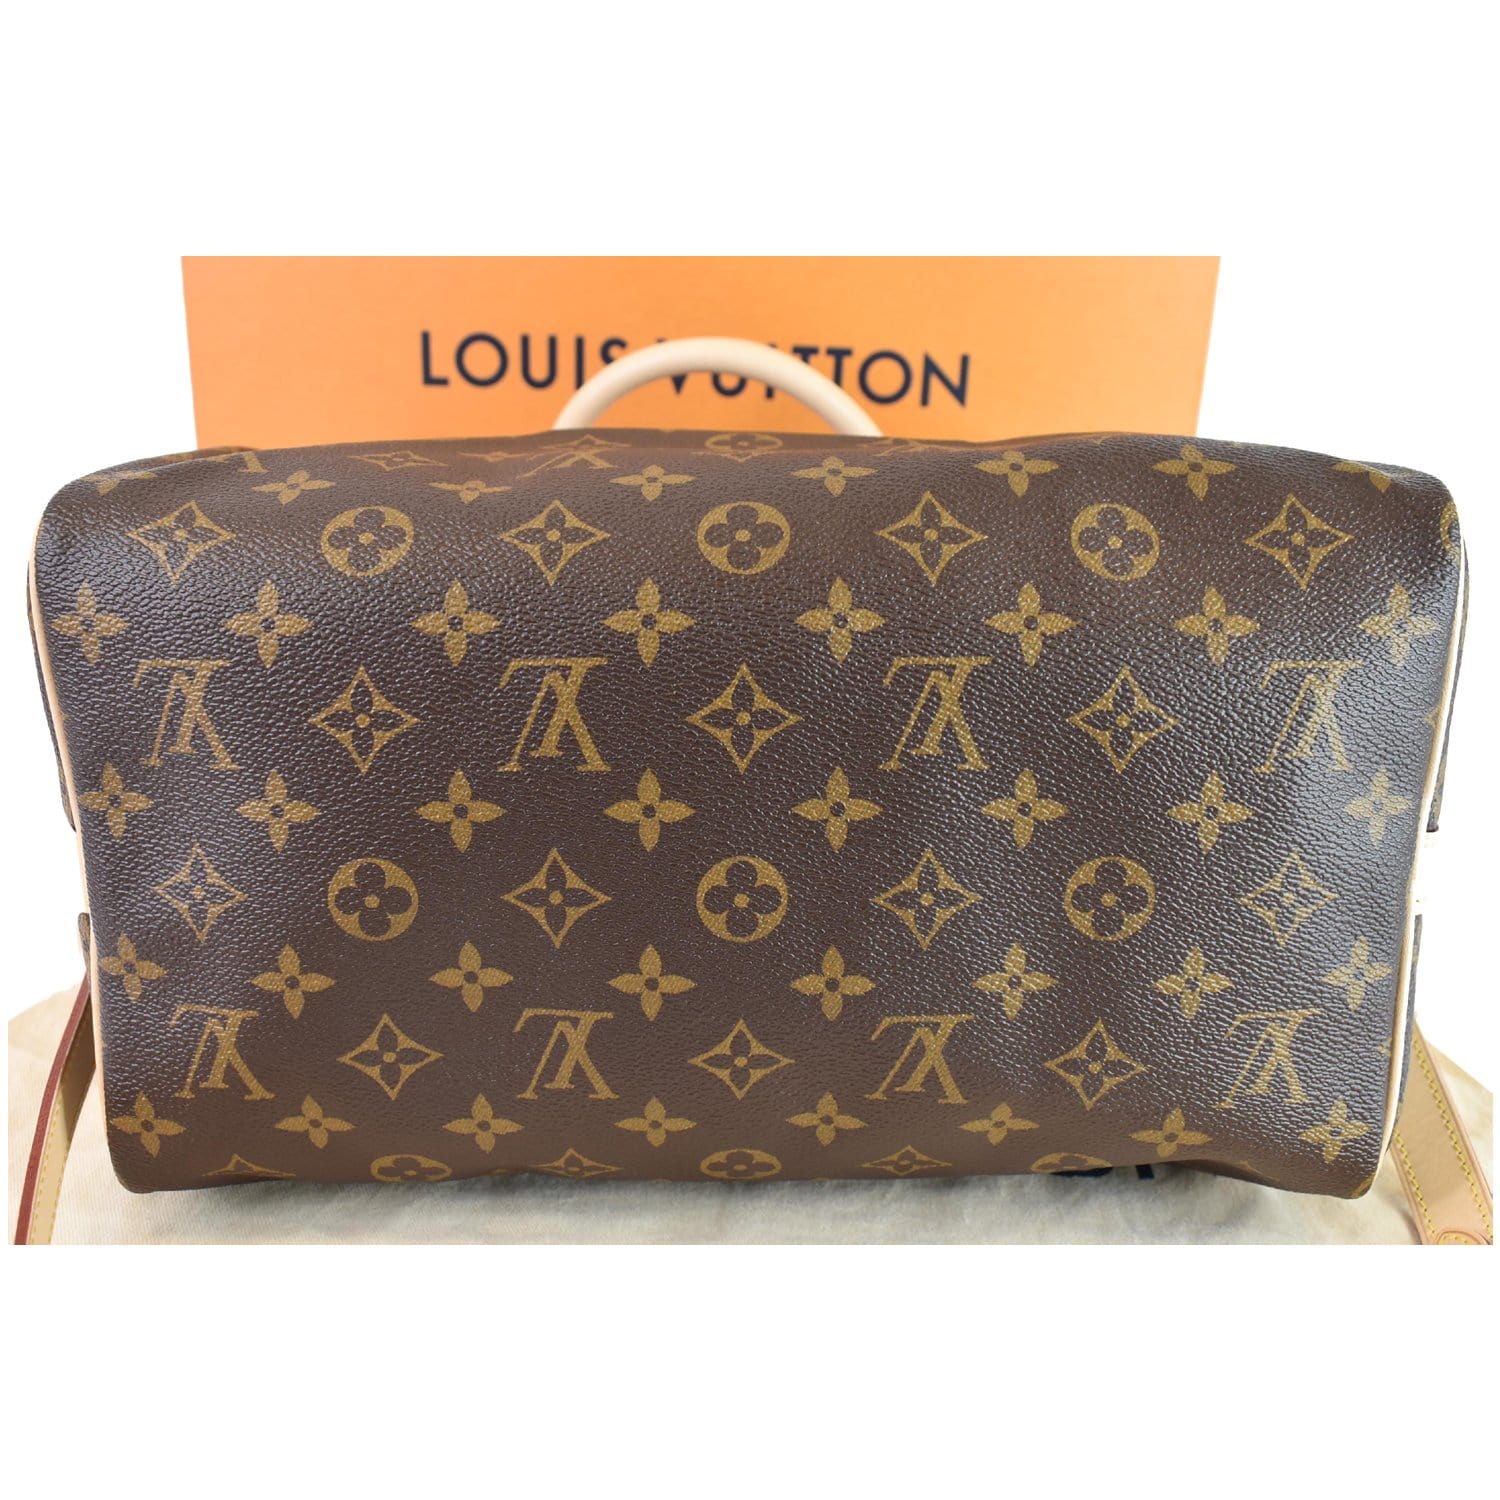 Louis+Vuitton+Speedy+Bandouliere+30+Brown+Canvas+%28Coated%29 for